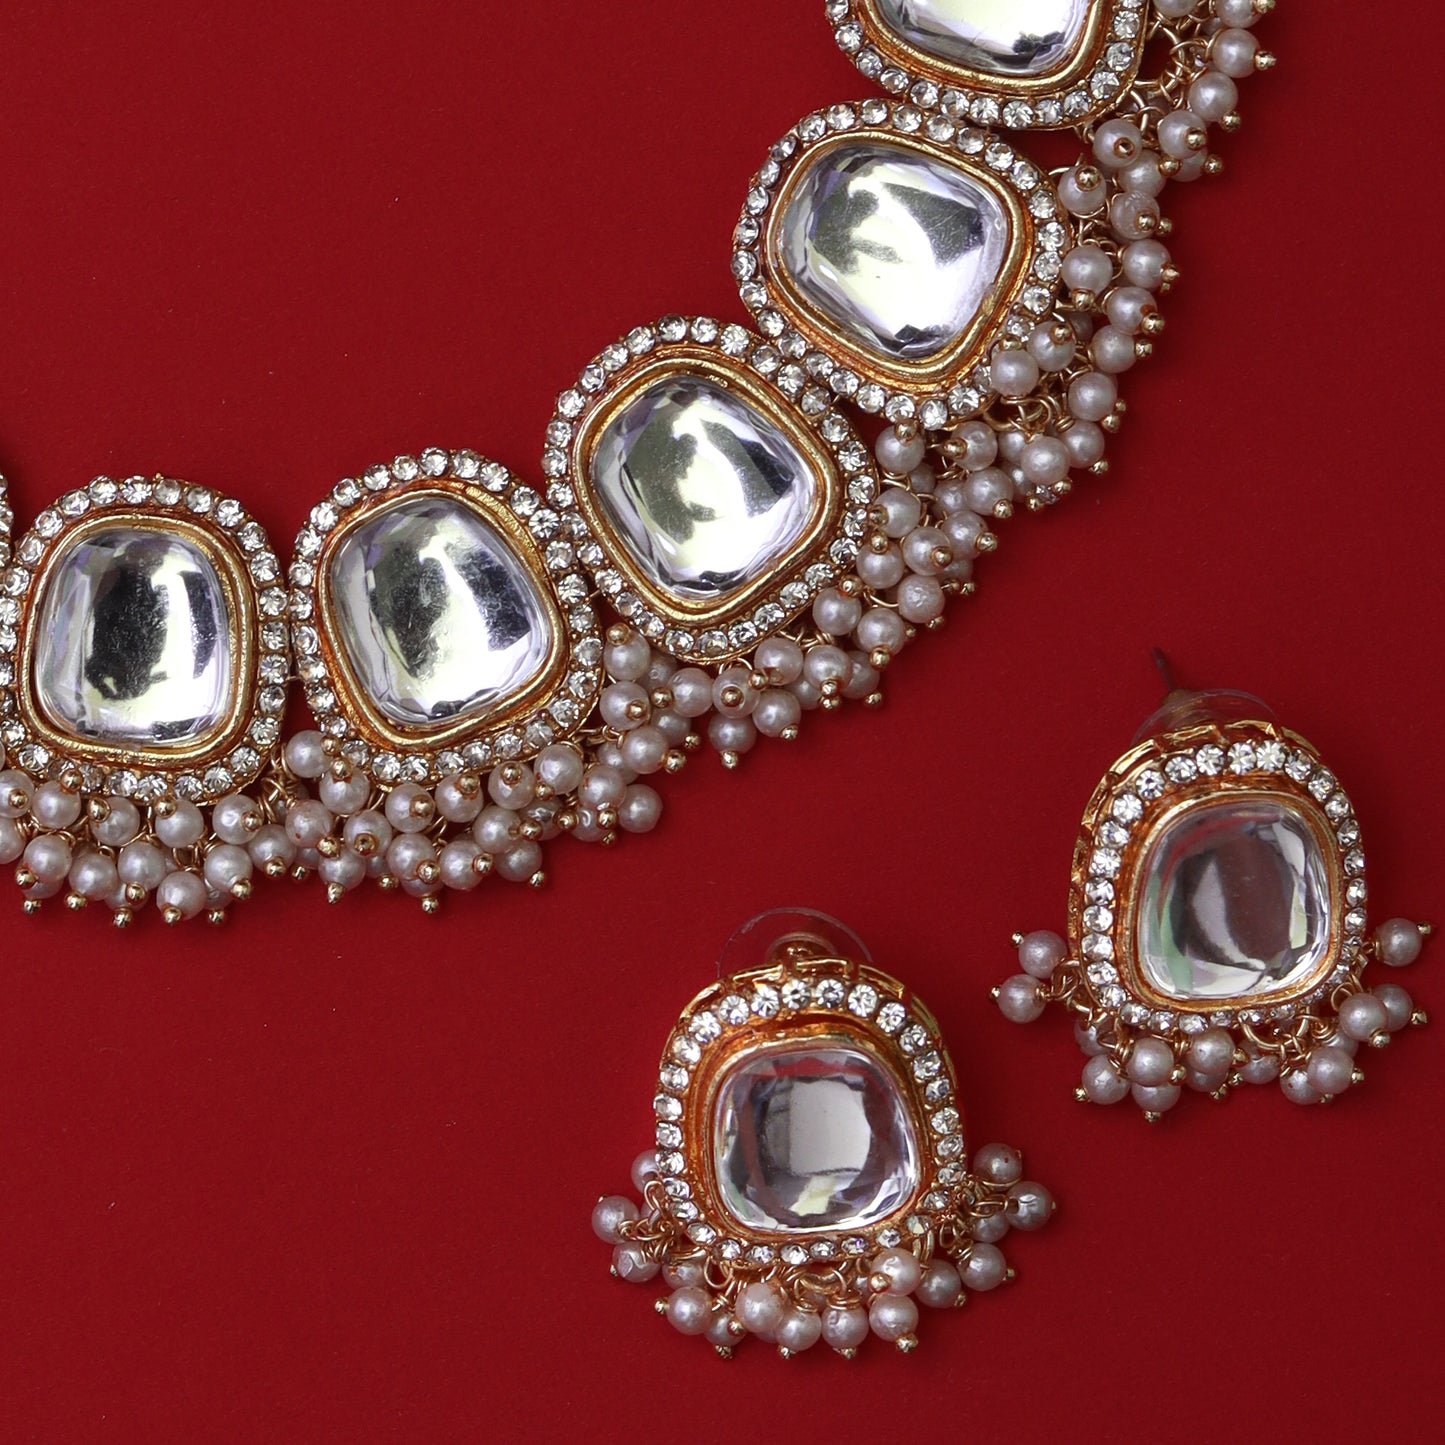 Saamya Necklace set with Earrings in Off white